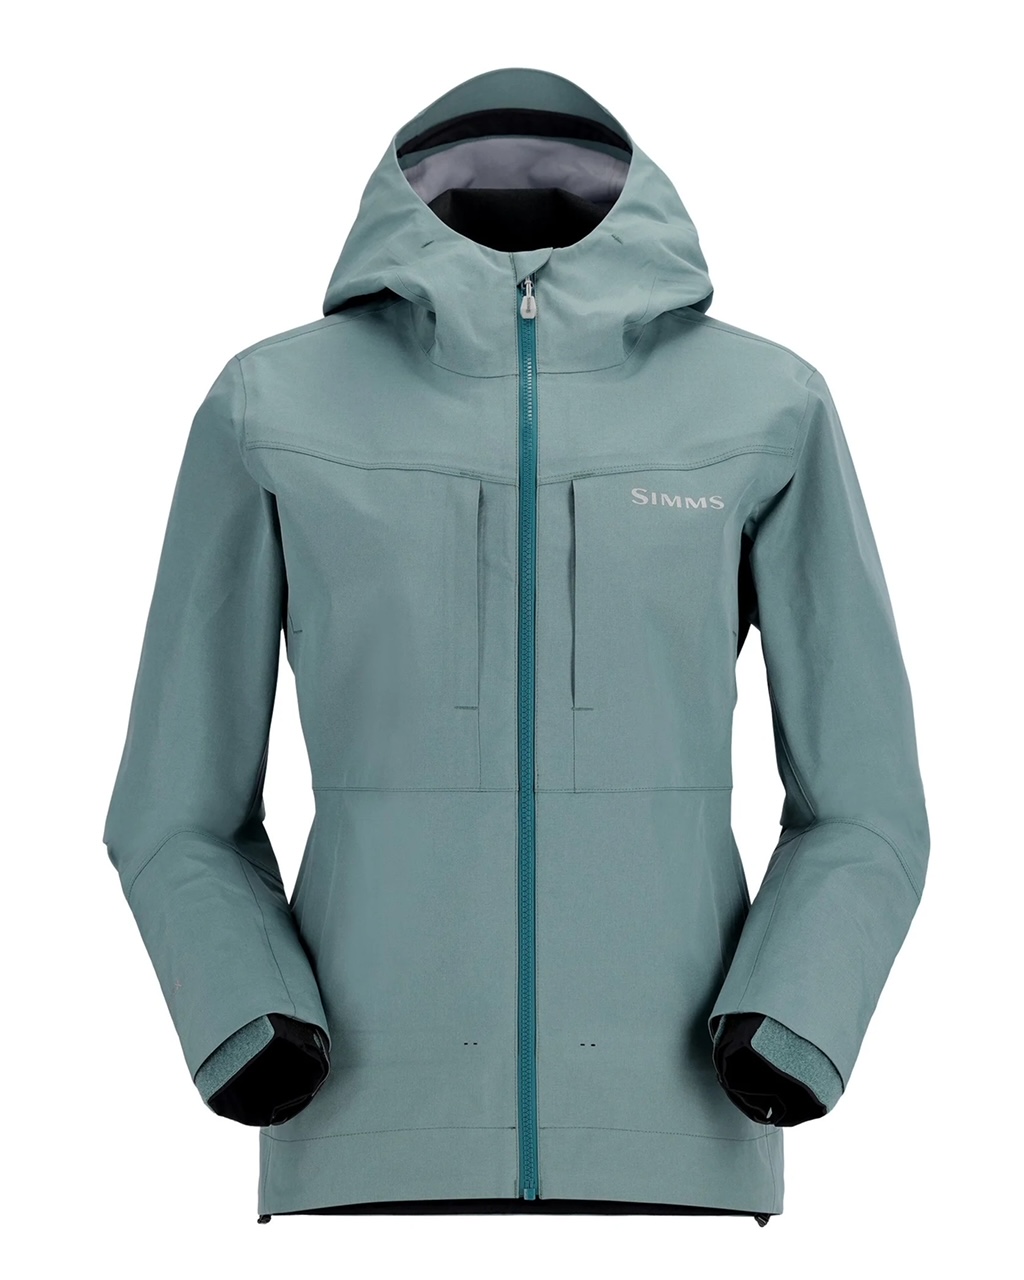 Simms W's G3 Guide Jacket - Avalon Teal - XL